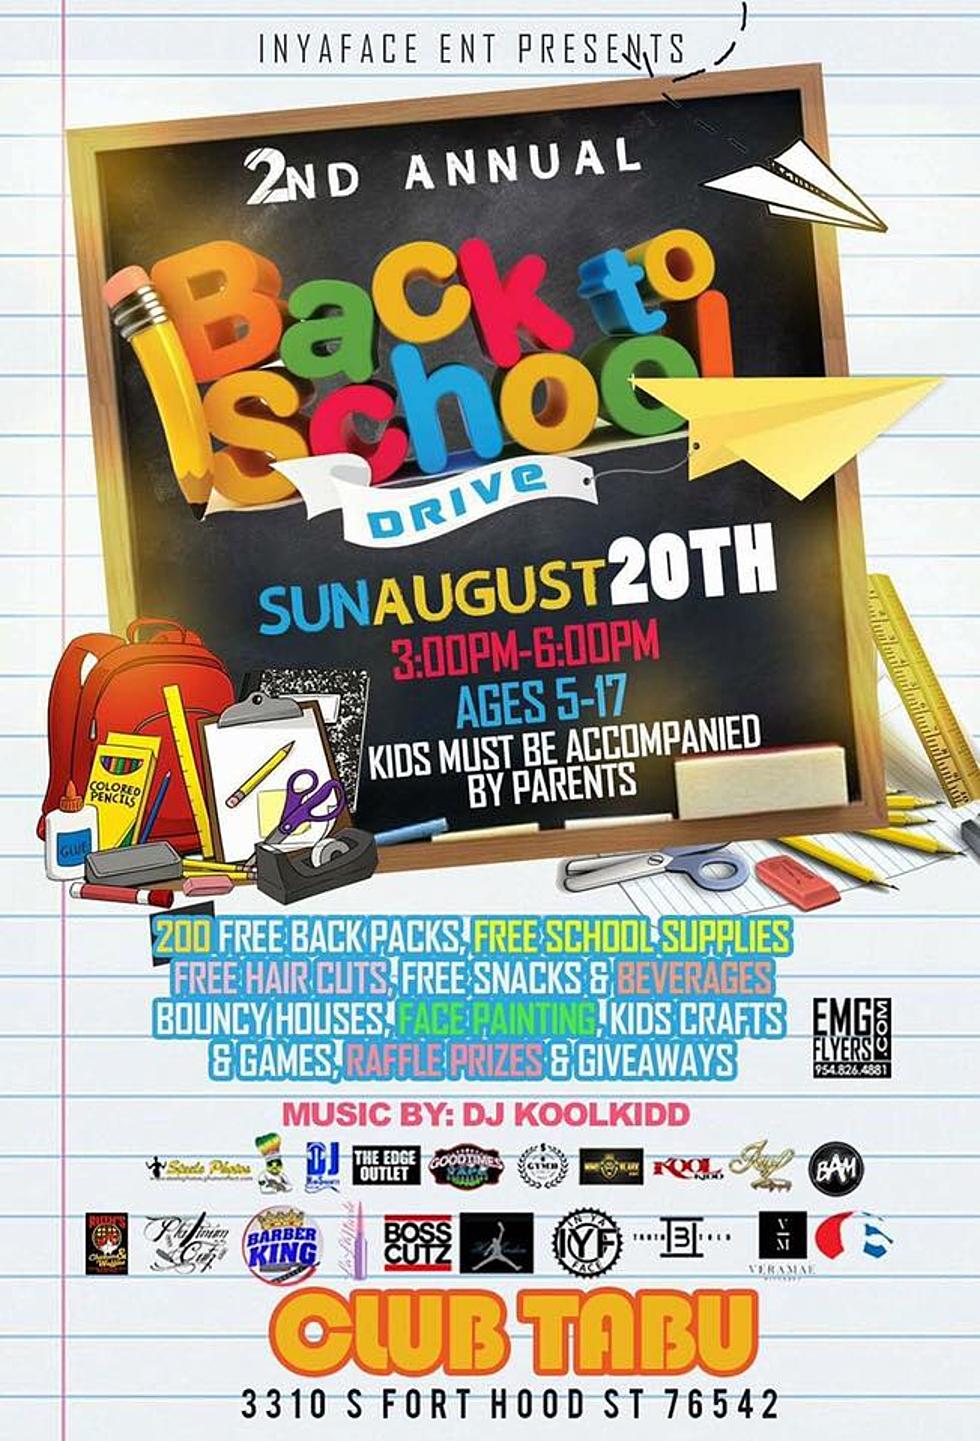 InYaFace Ent Presents ‘The 2nd Annual Back To School Drive’